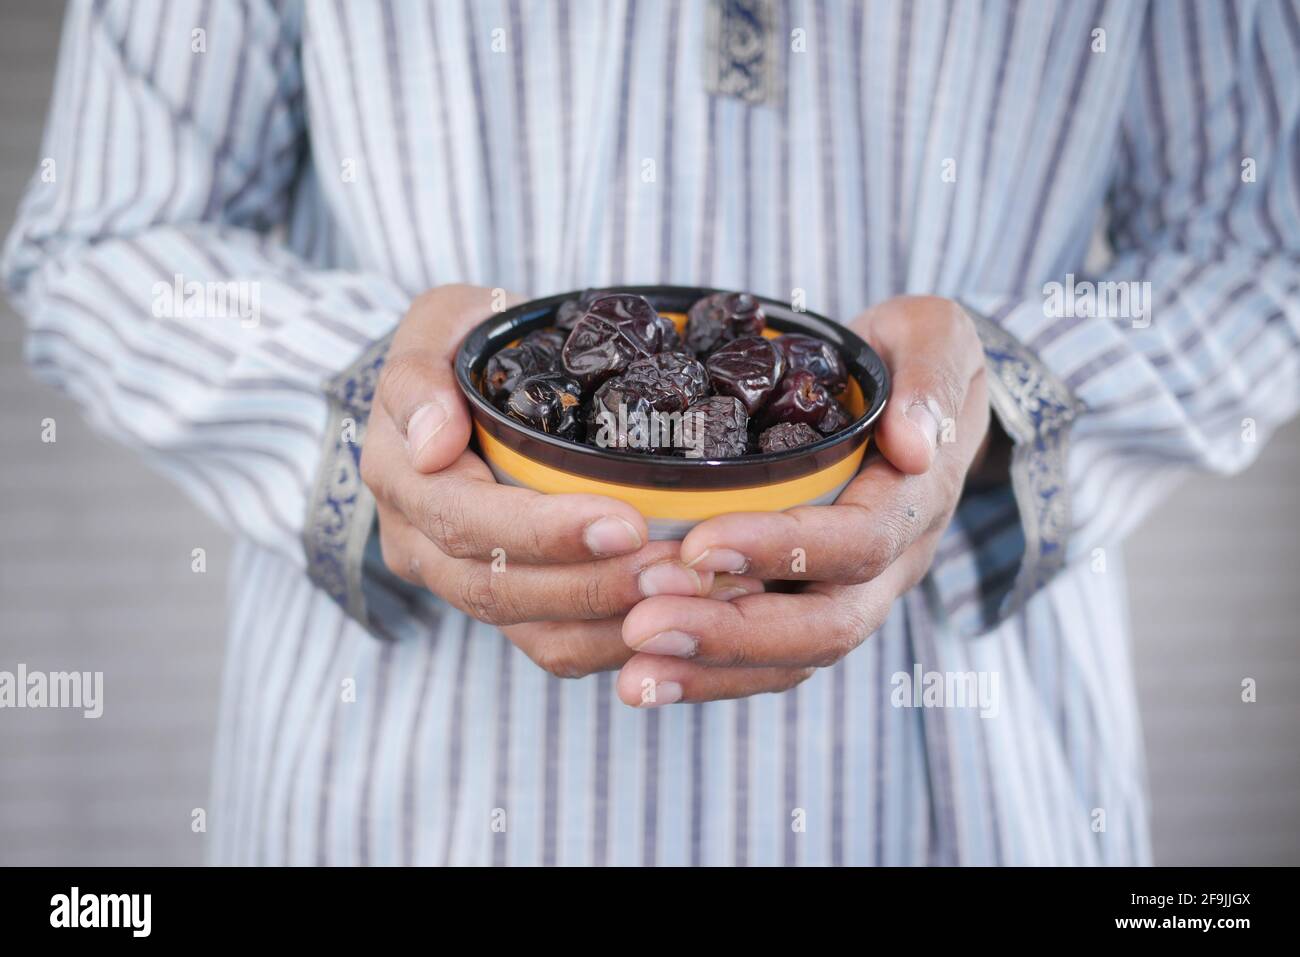 the concept of ramadan, hand holding a bowl of date fruits  Stock Photo